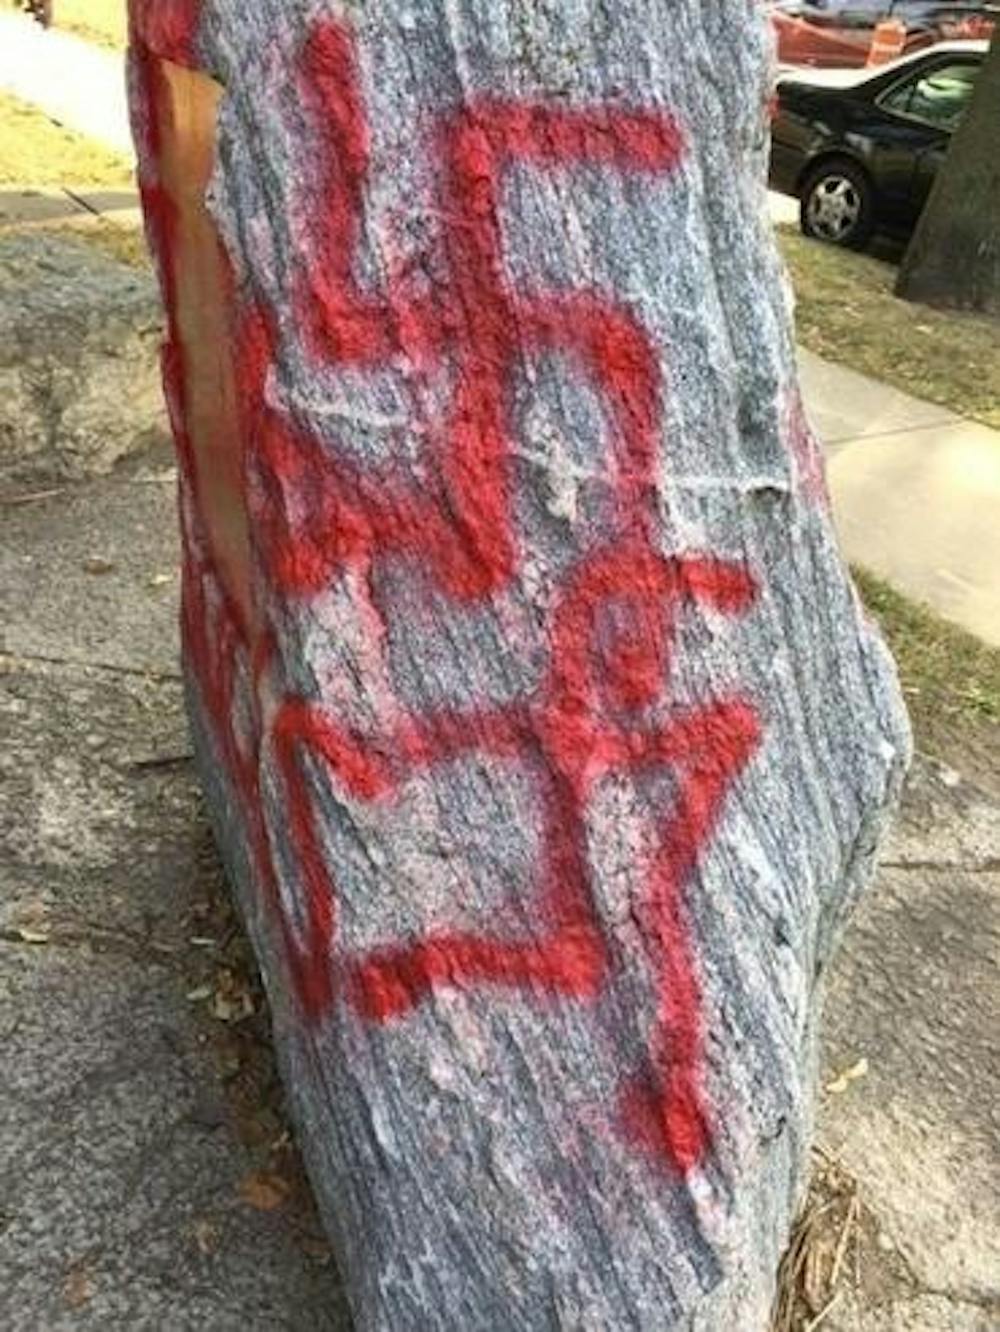 Hate crimes in Madison like the vandalism near a synagogue in James Madison Park have increased dramatically since 2015.